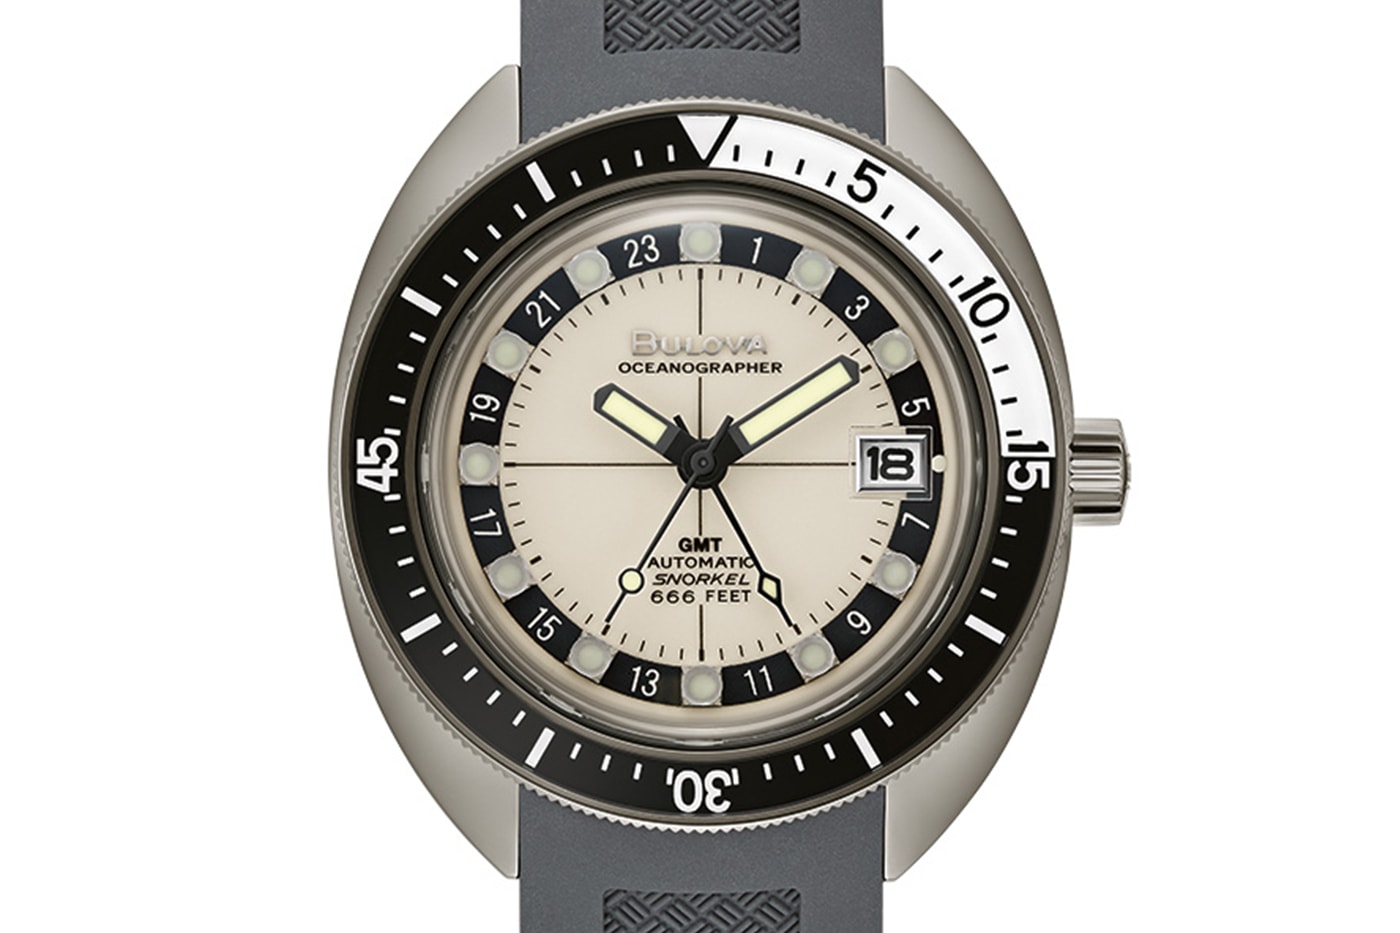 Bulova New Oceanographer GMT Collection Release Info